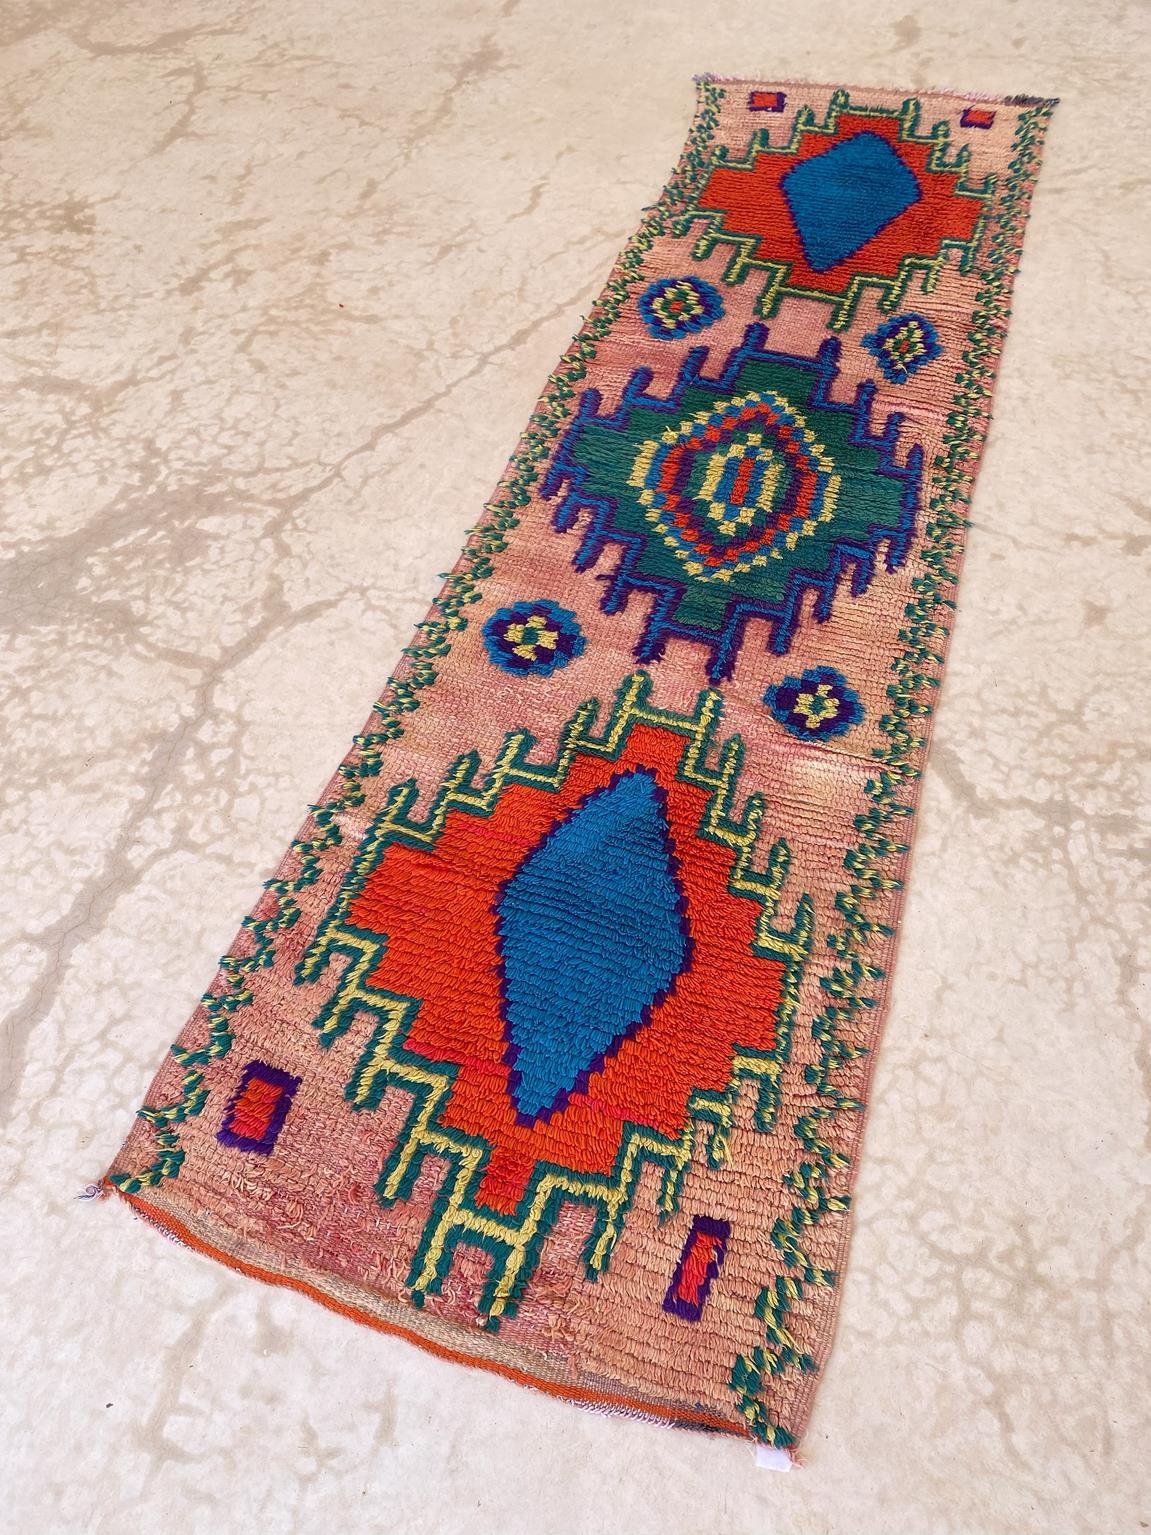 Vintage Moroccan Boujad rug - Pink/blue/red - 2.8x10.2feet / 87x311cm For Sale 2